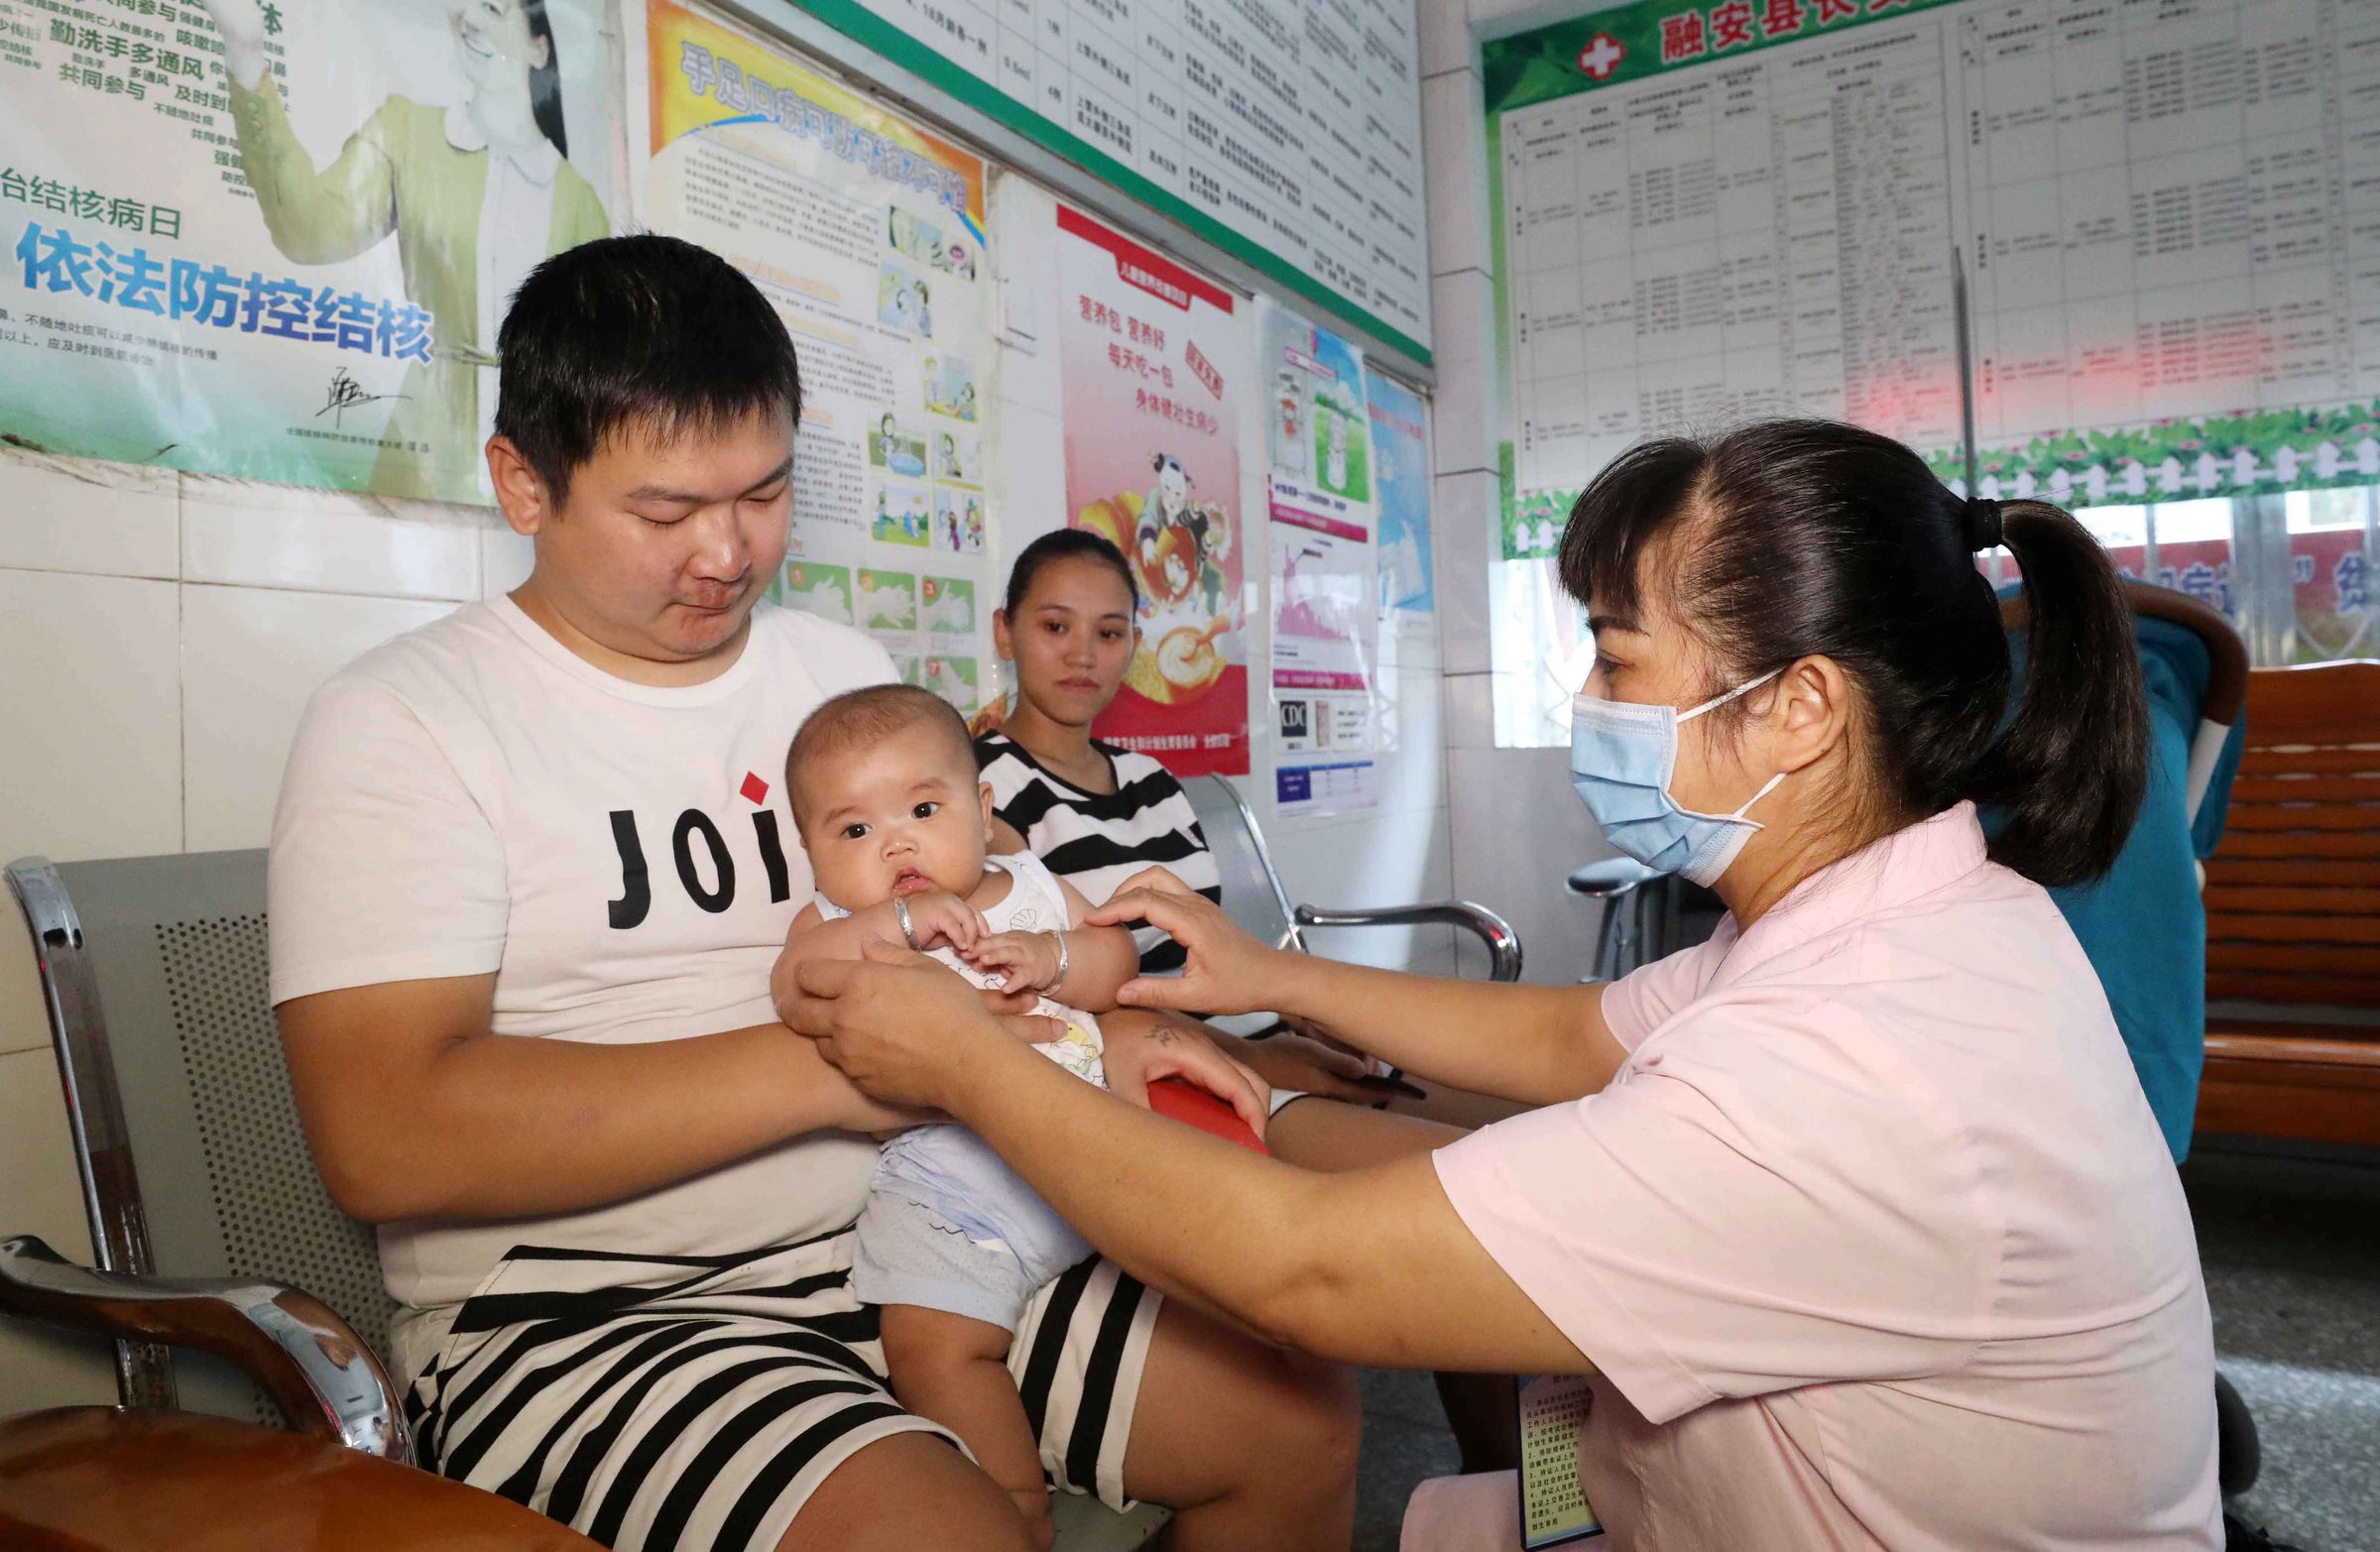 President Xi Jinping Orders Thorough Investigation Into Vaccine Scandal